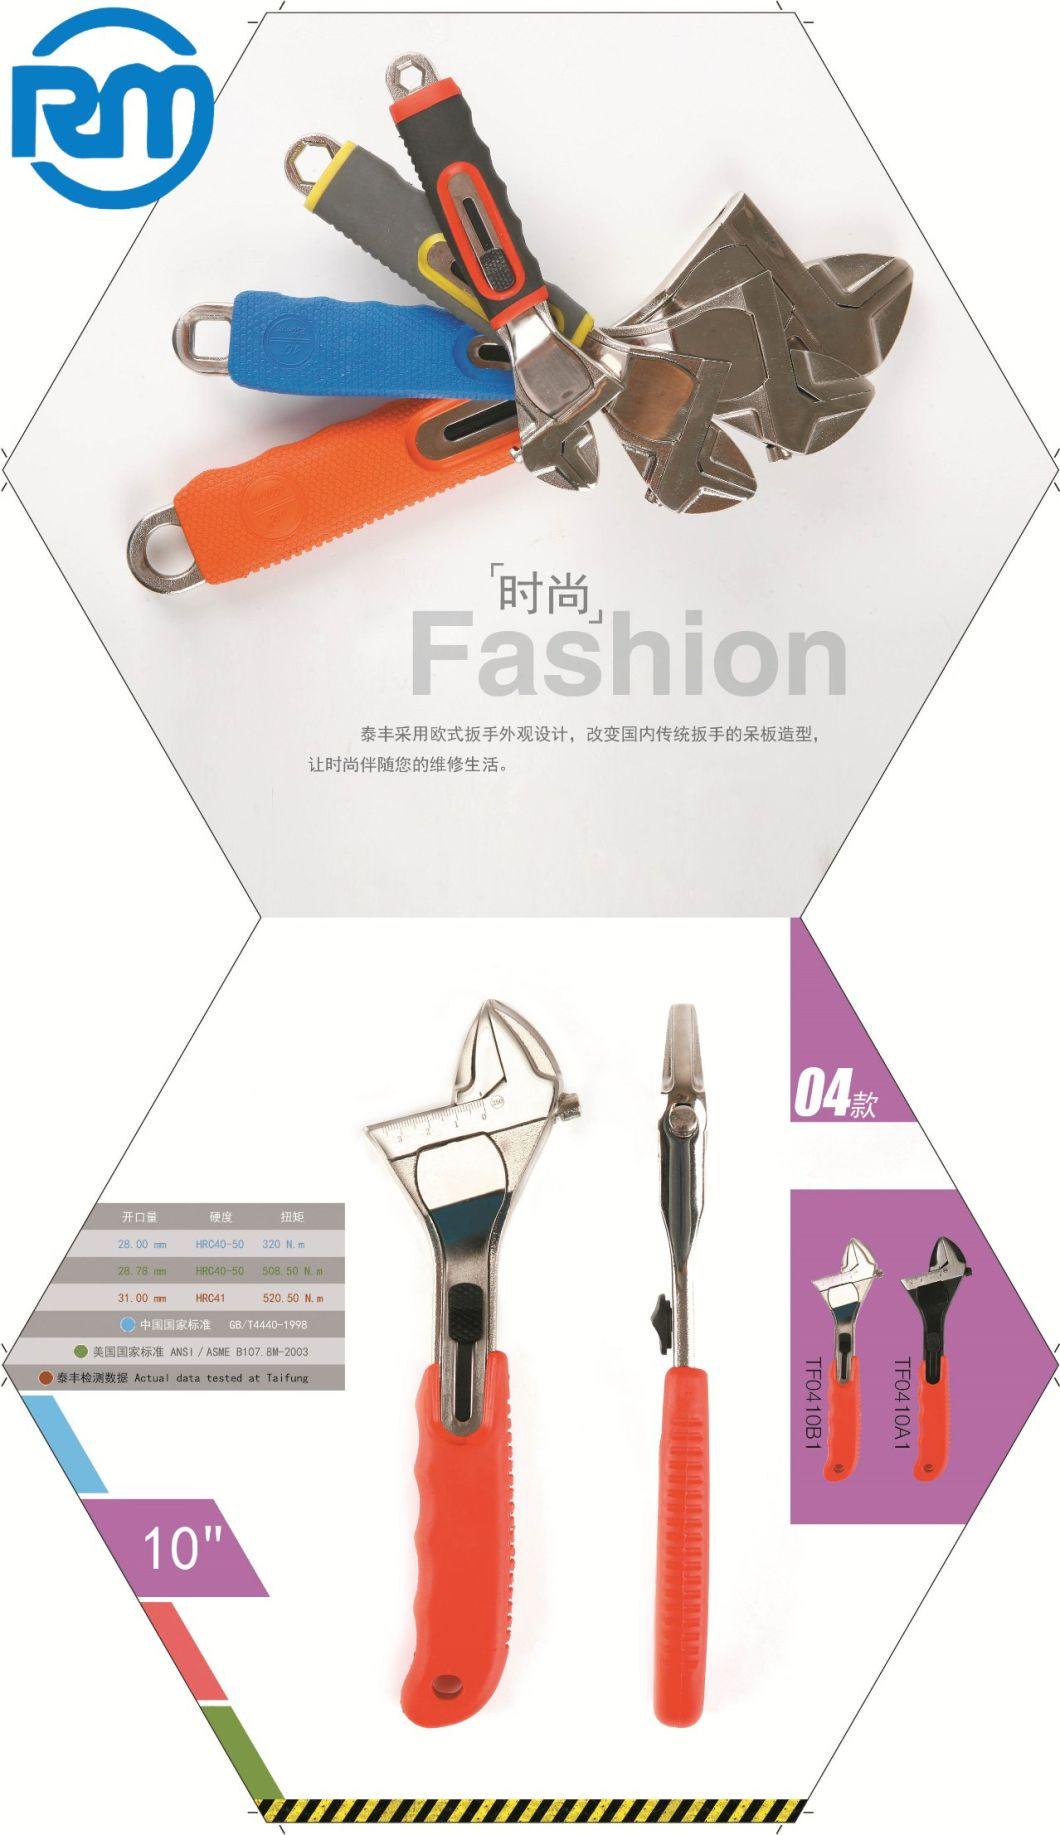 Custom Ratchet Flex Head Combination Wrench Easily Push and Pull Strictly Controlled Professional Quality Sliding Adjusting Button